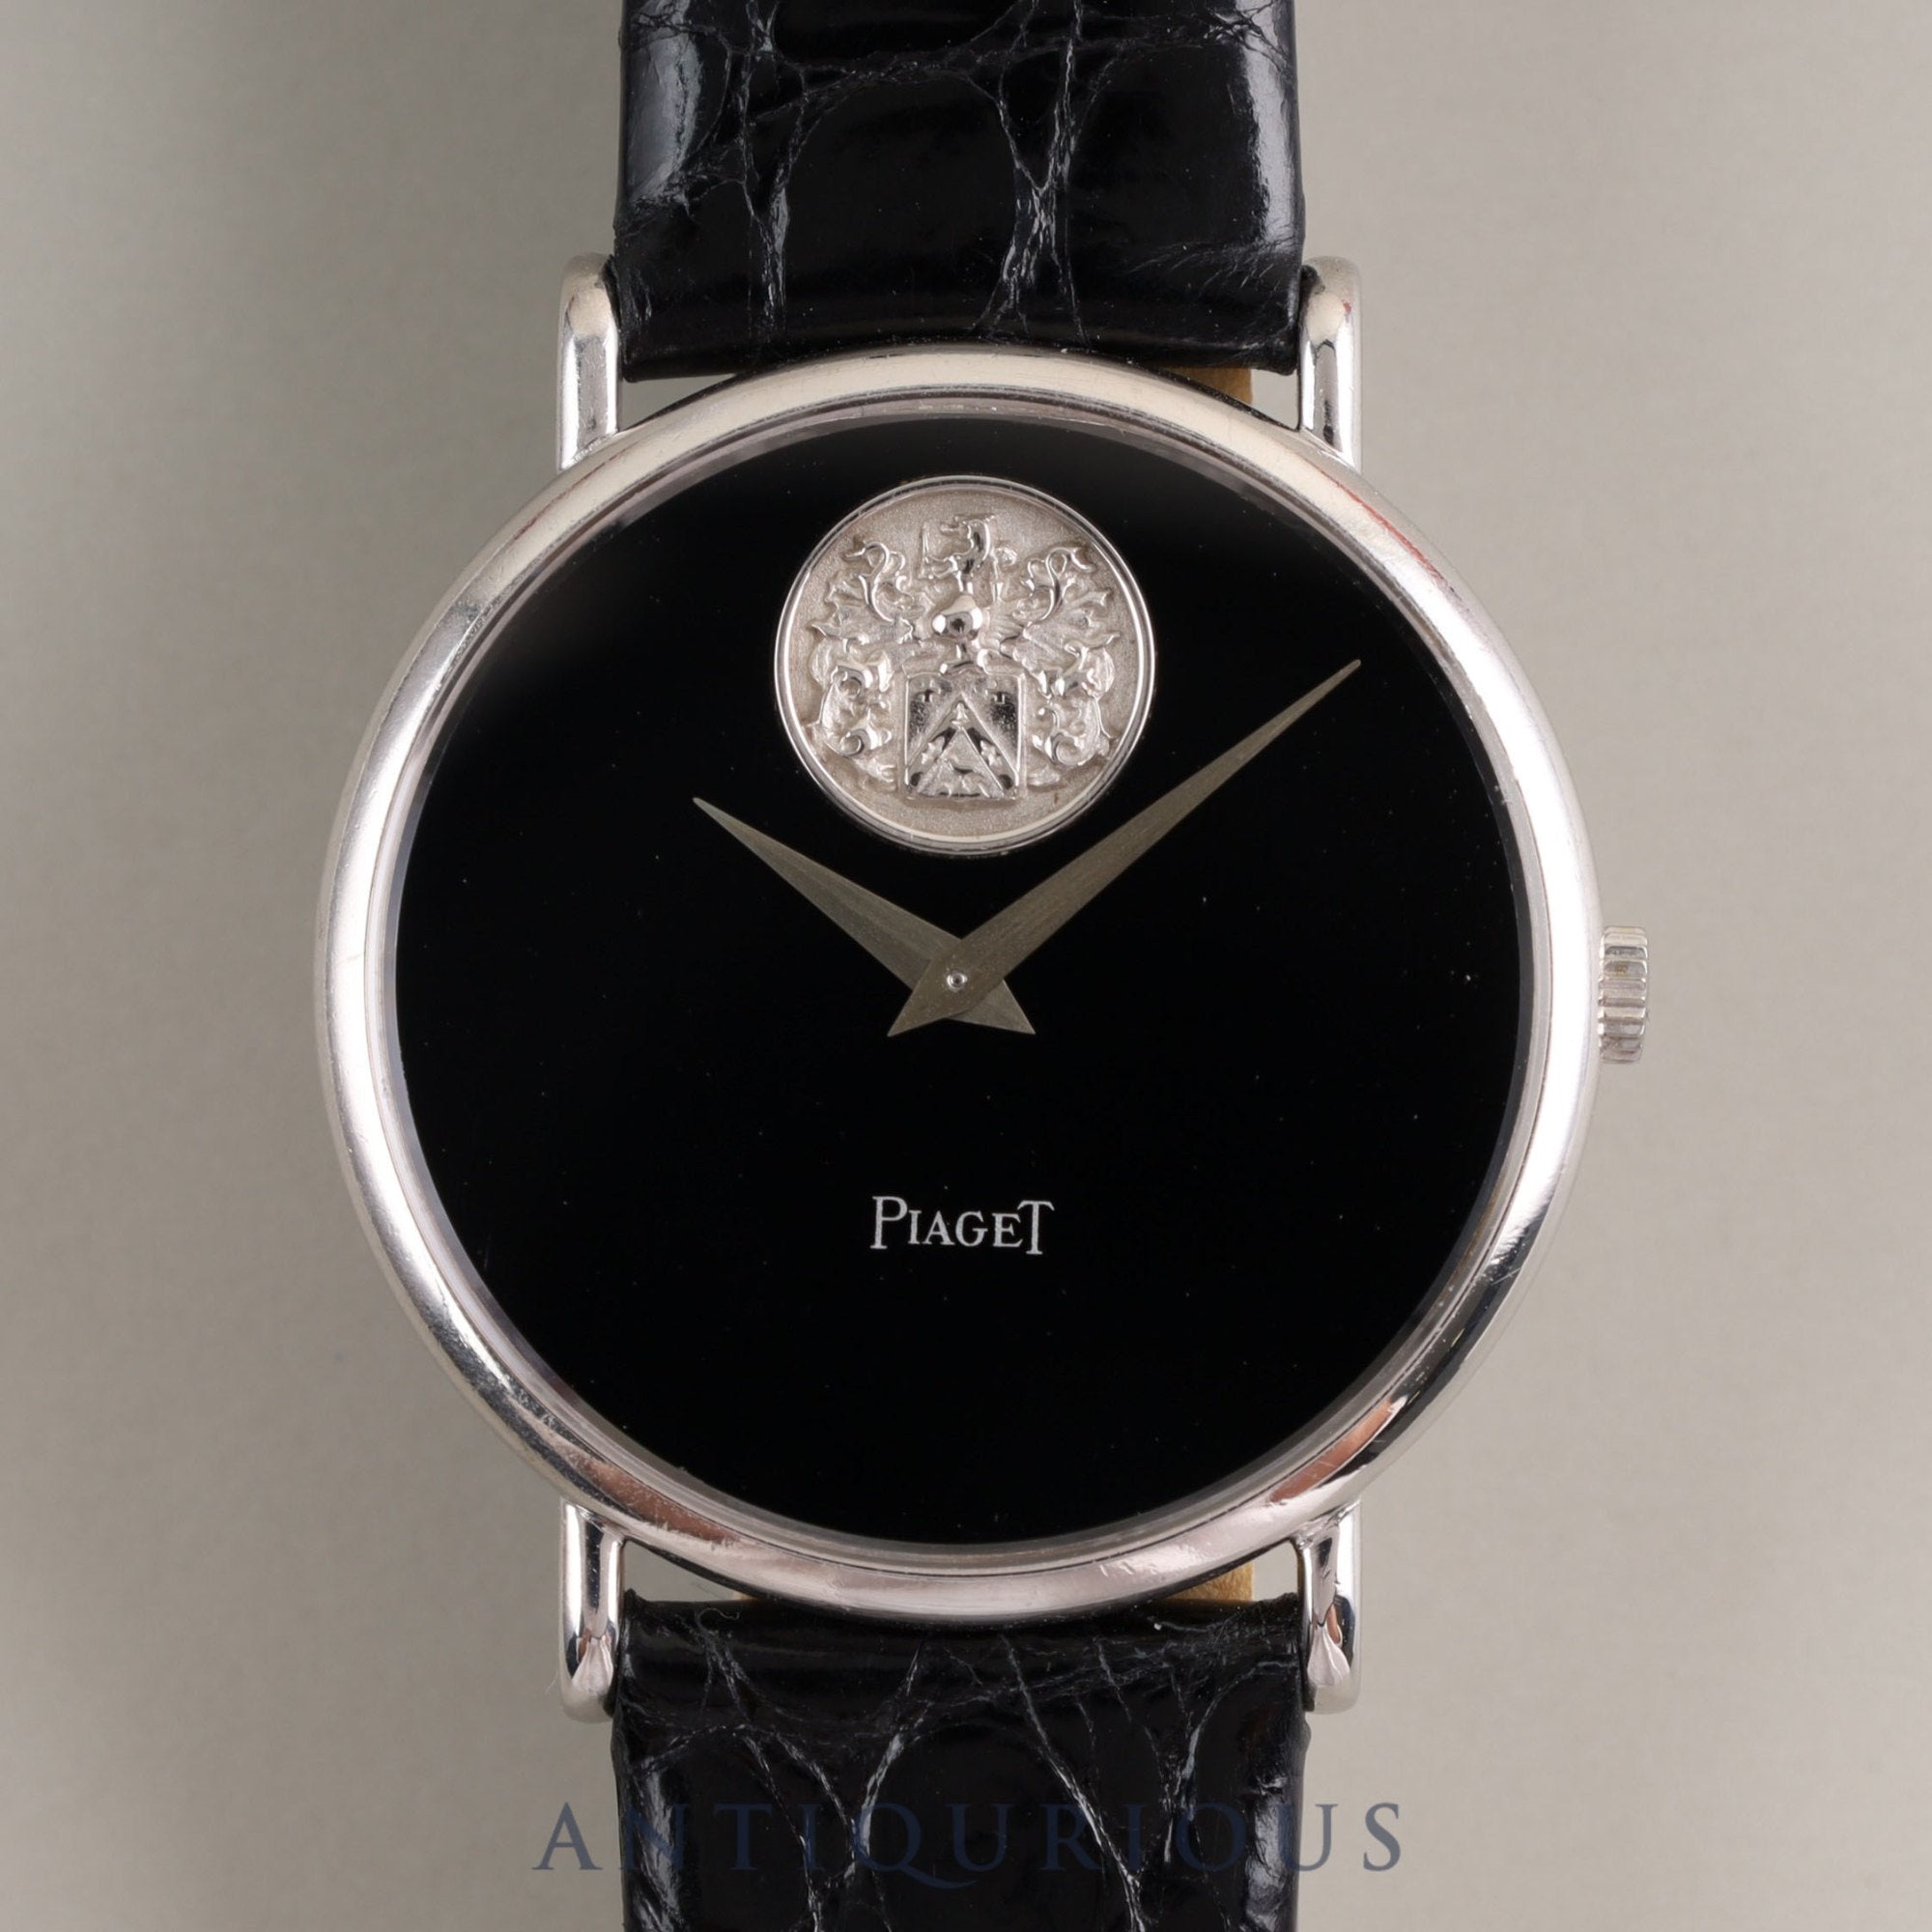 PIAGET ROUND 9025 Manual winding Cal.9P2 WG Leather Genuine buckle (750) Black dial